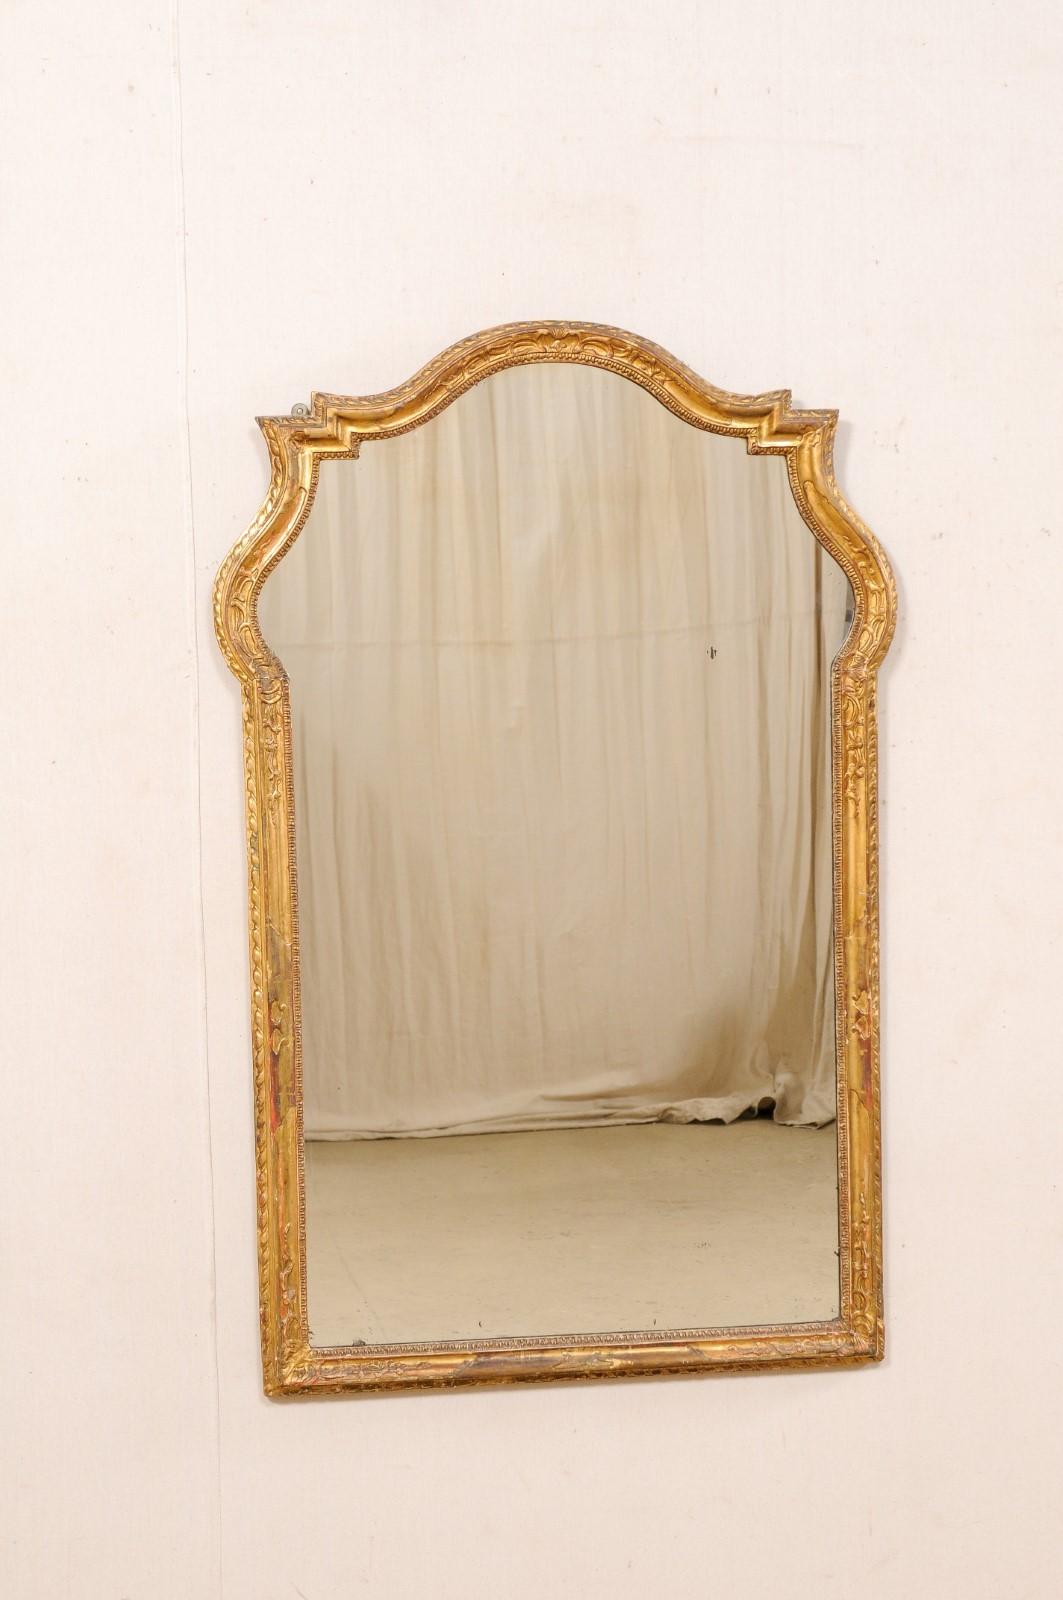 An Italian carved-wood mirror, with its original finish, from the early 19th century. This antique mirror from Italy has a hand-carved and beautifully textured surround with varied trim moldings, shapely top lines include a gracefully arched crest,